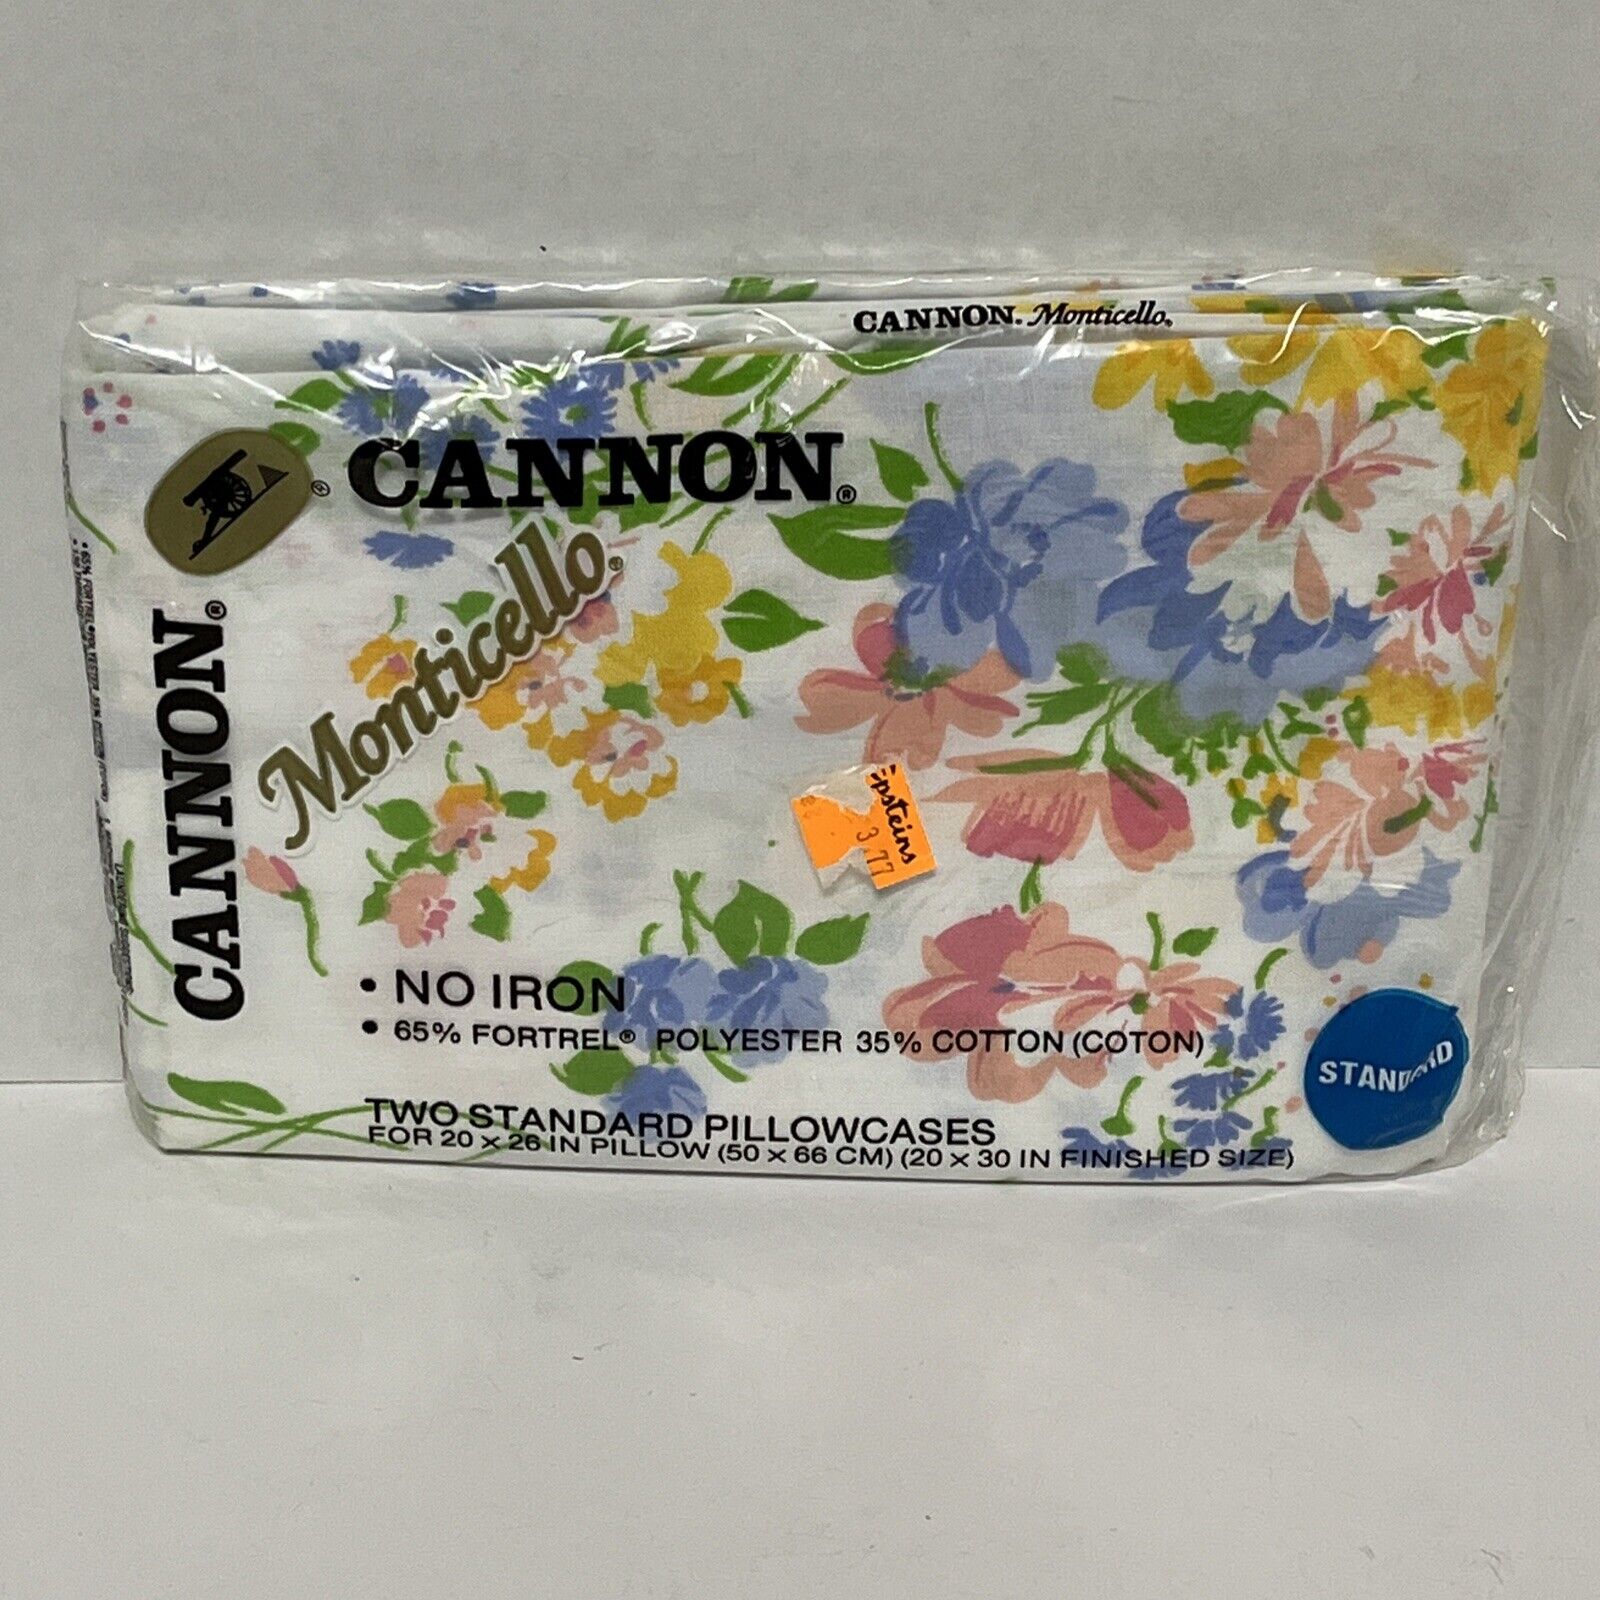 Vintage Cannon Monticello Pillowcases Colorful Floral Pattern Pair New Old Stock